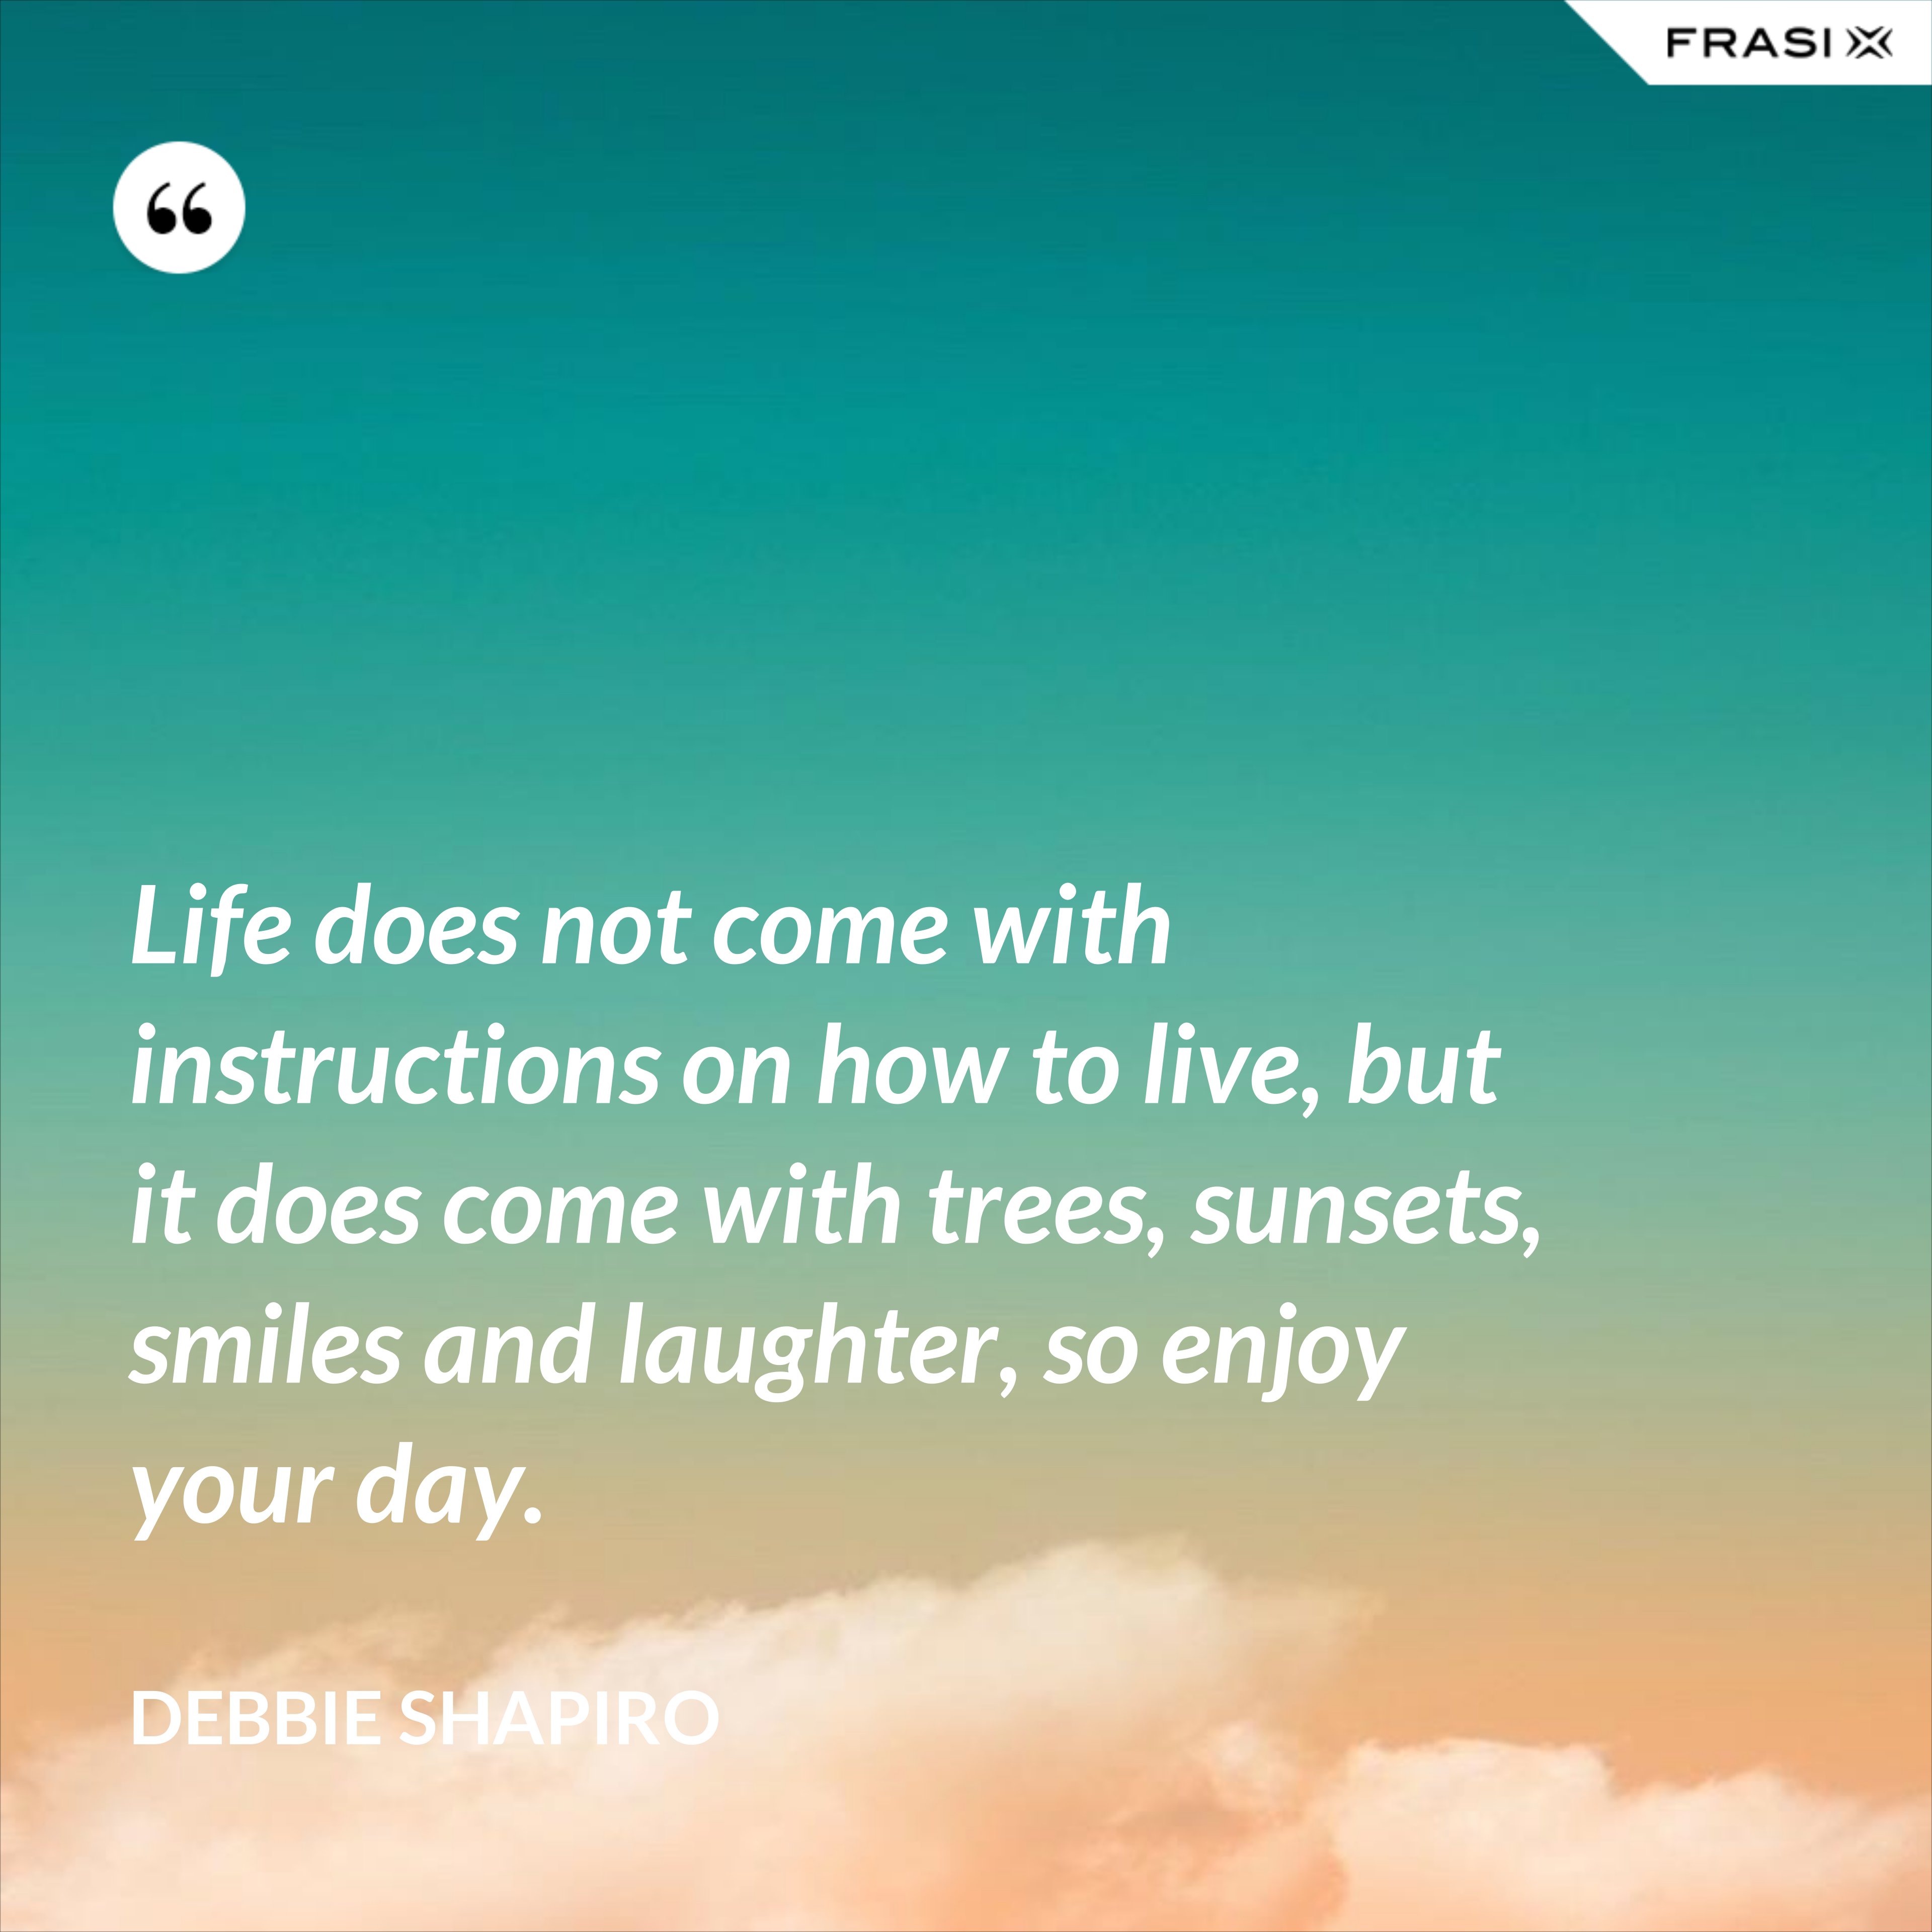 Life does not come with instructions on how to live, but it does come with trees, sunsets, smiles and laughter, so enjoy your day. - Debbie Shapiro